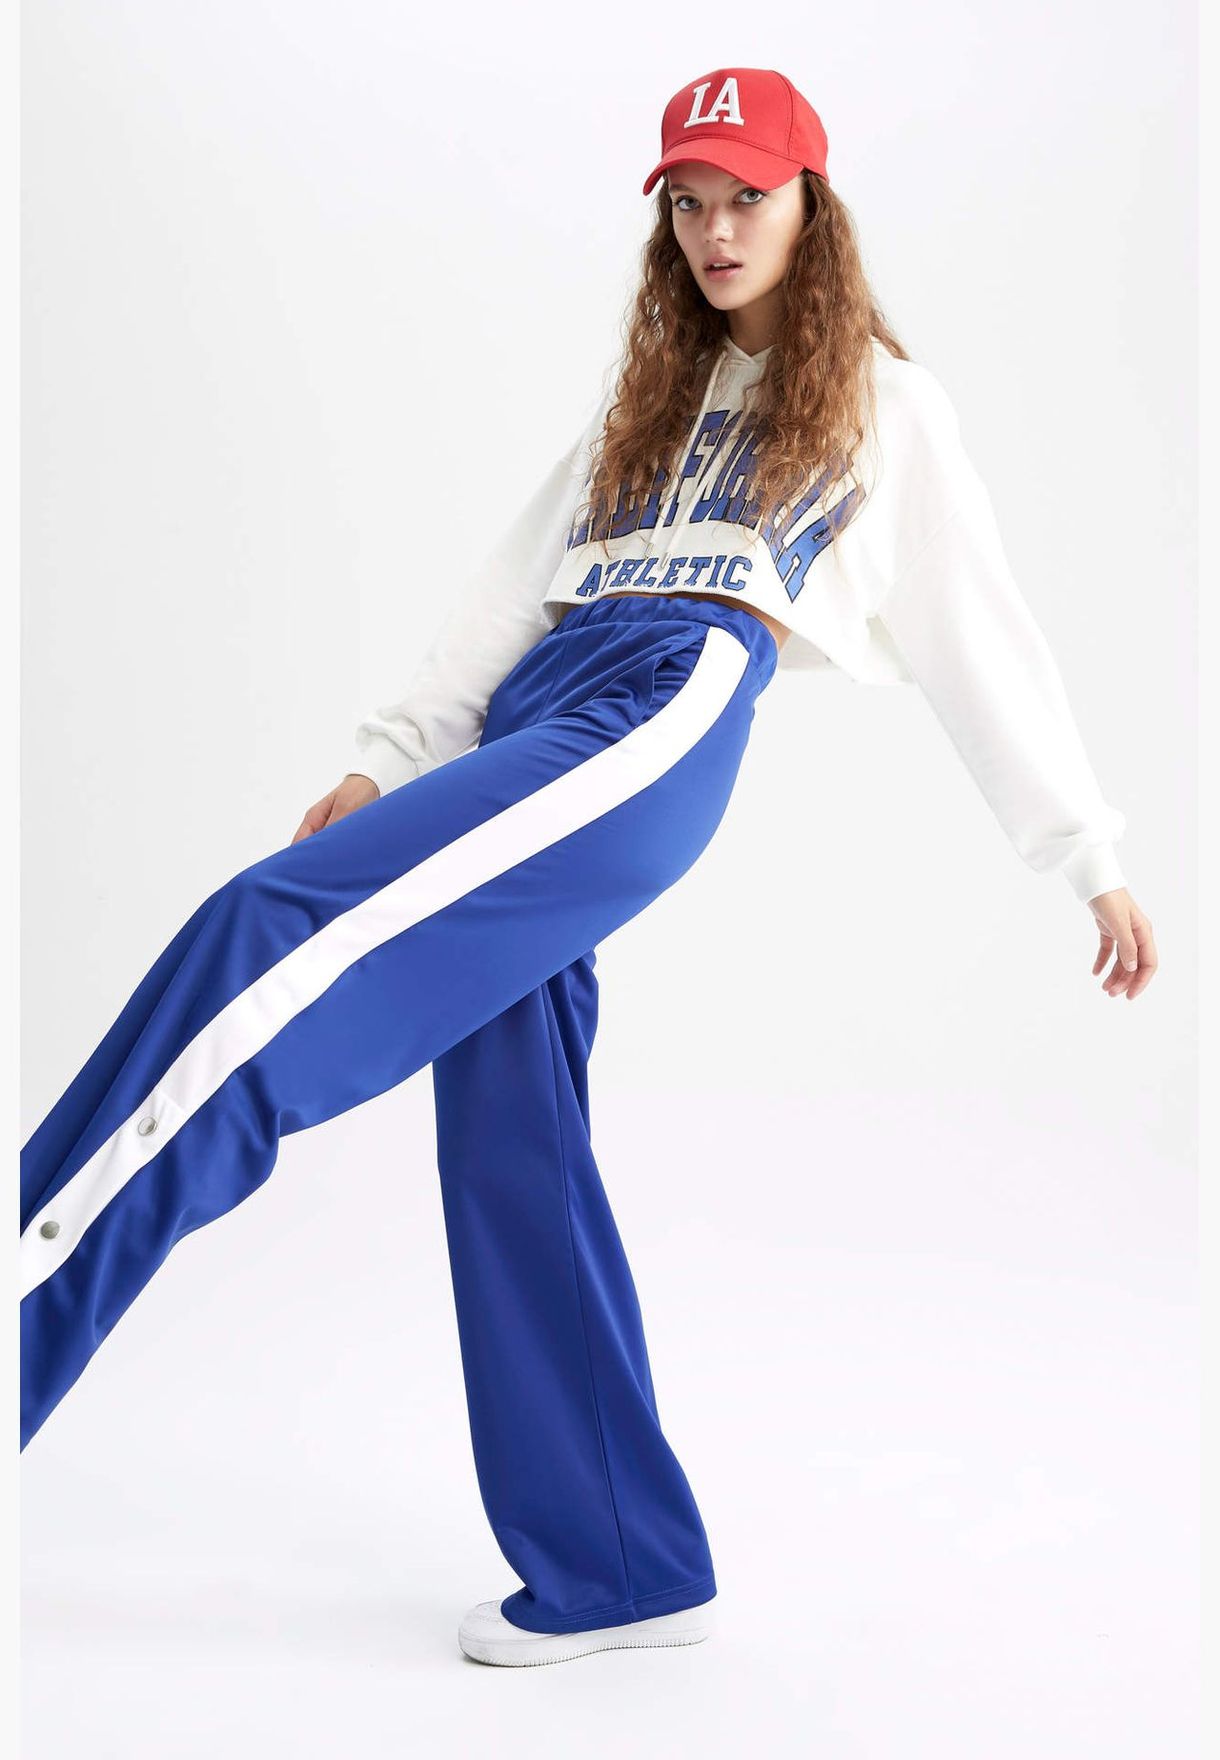 Woman Wide Leg Knitted Trousers